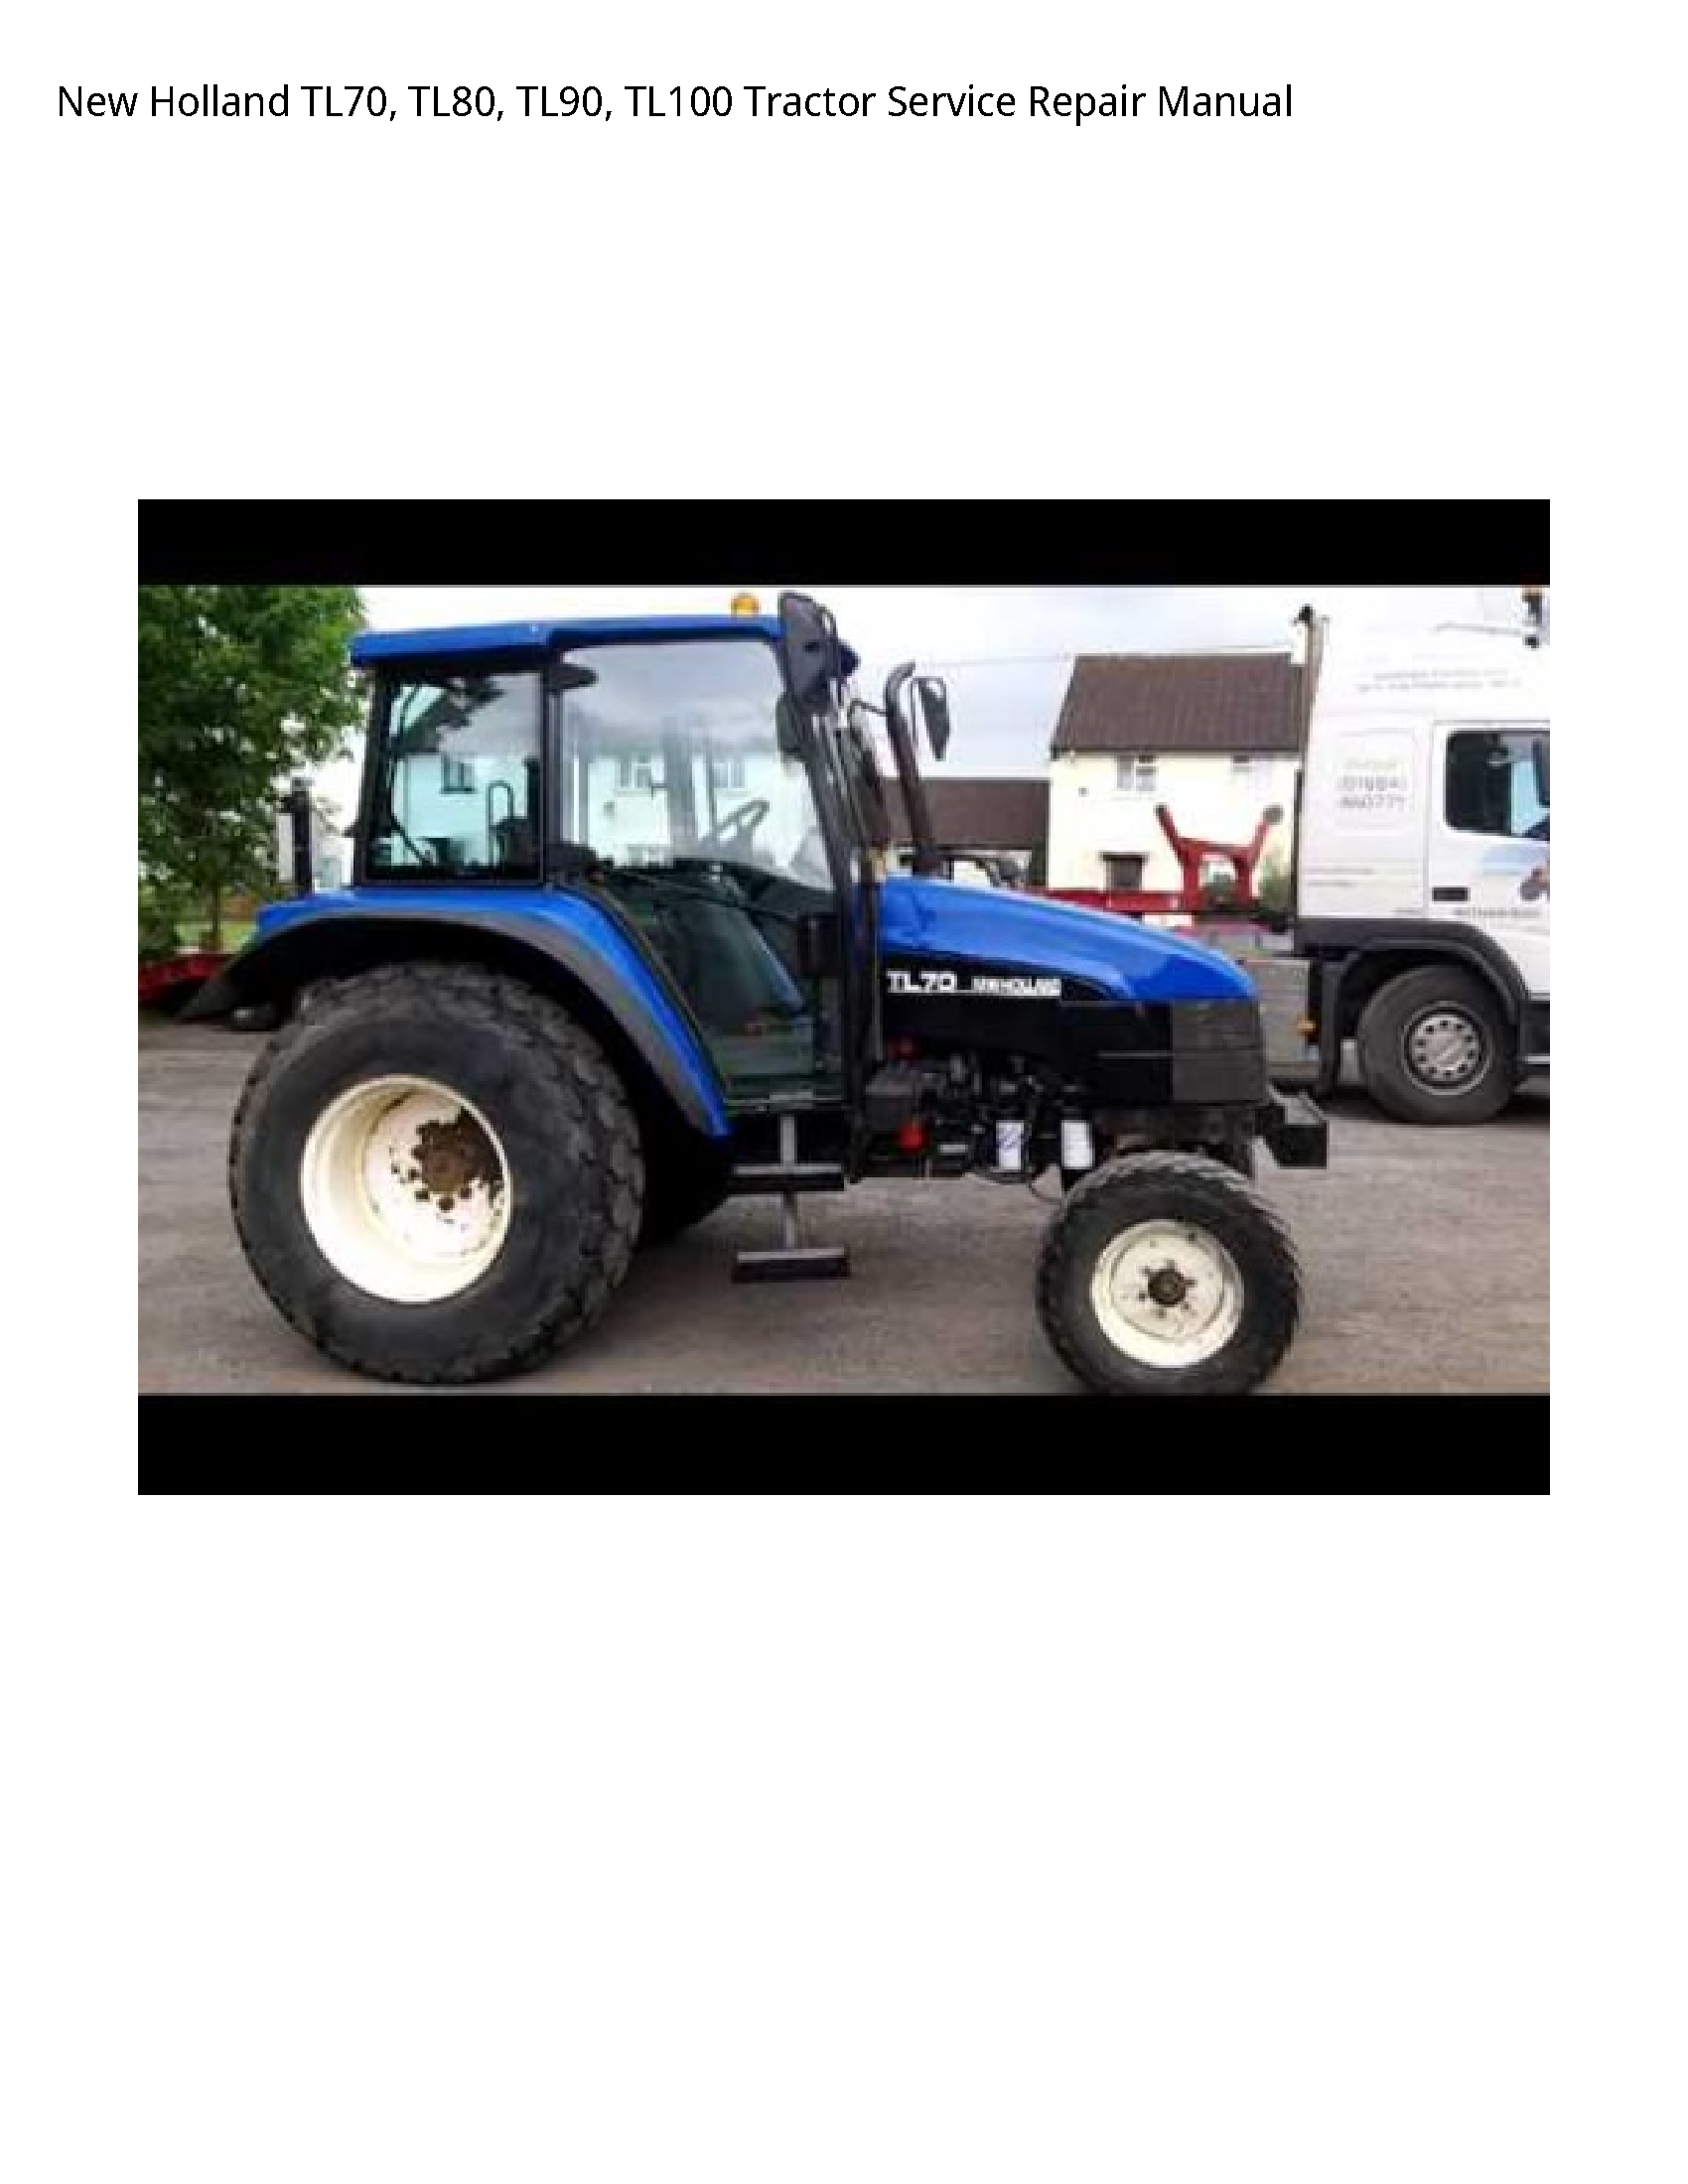 New Holland TL70 Tractor manual